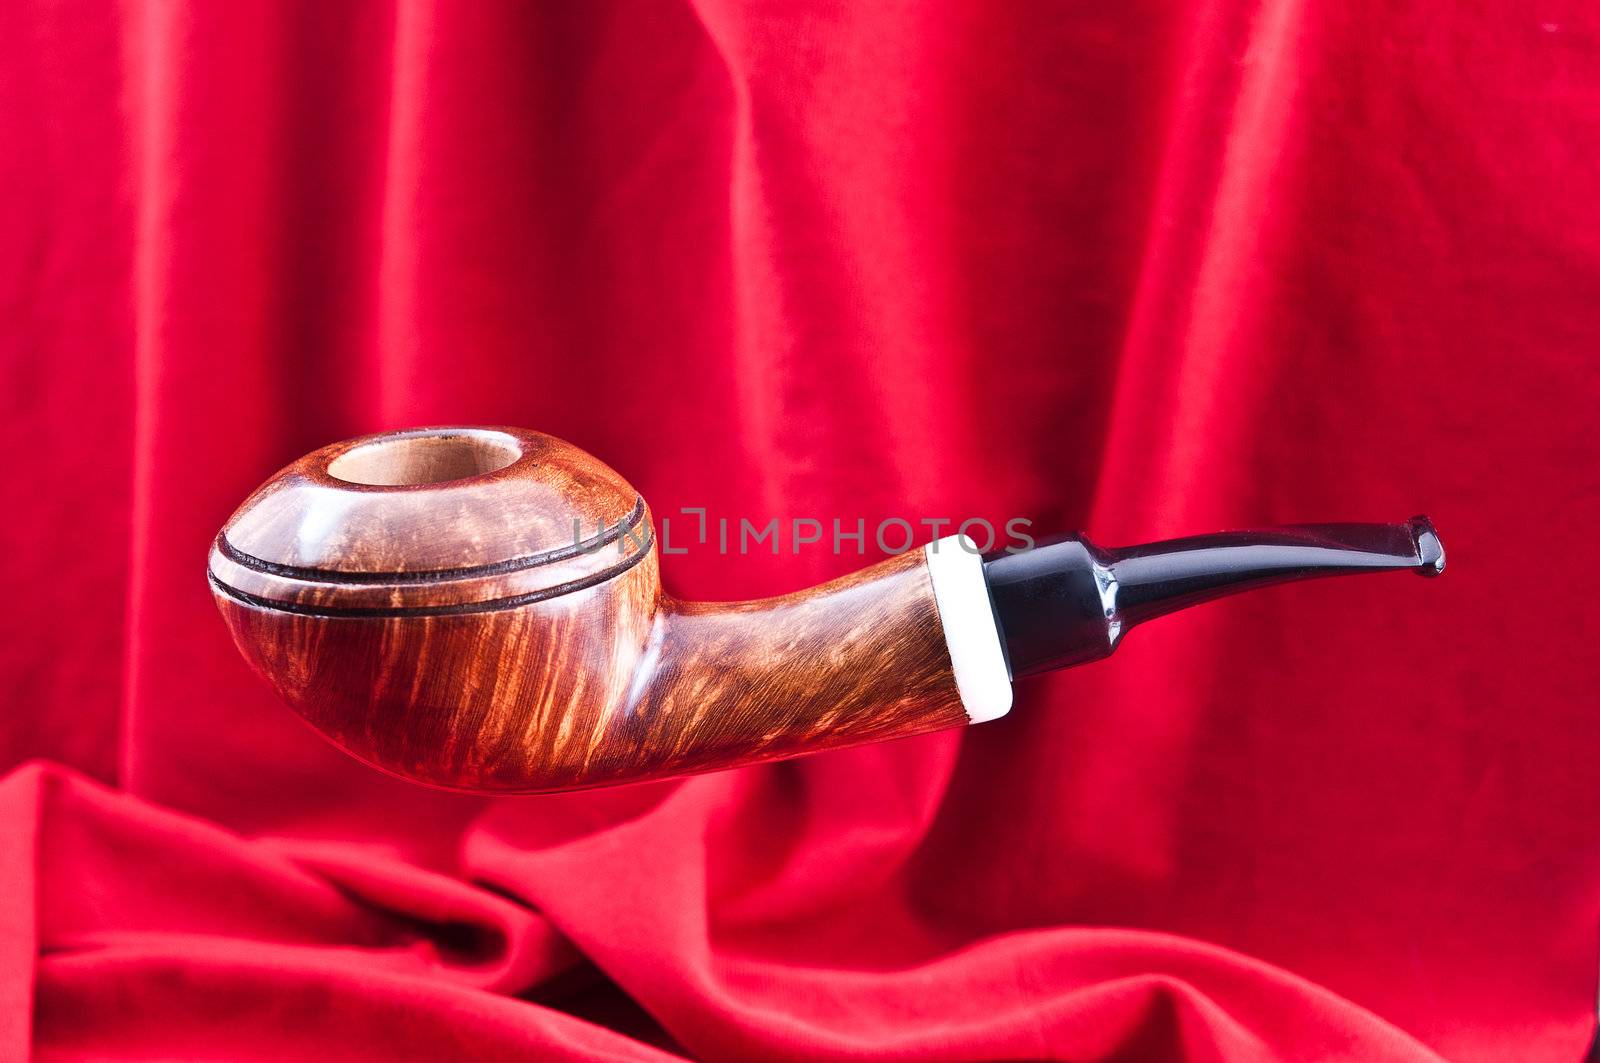 A new pipe for tobacco smoking was photographed against a red background